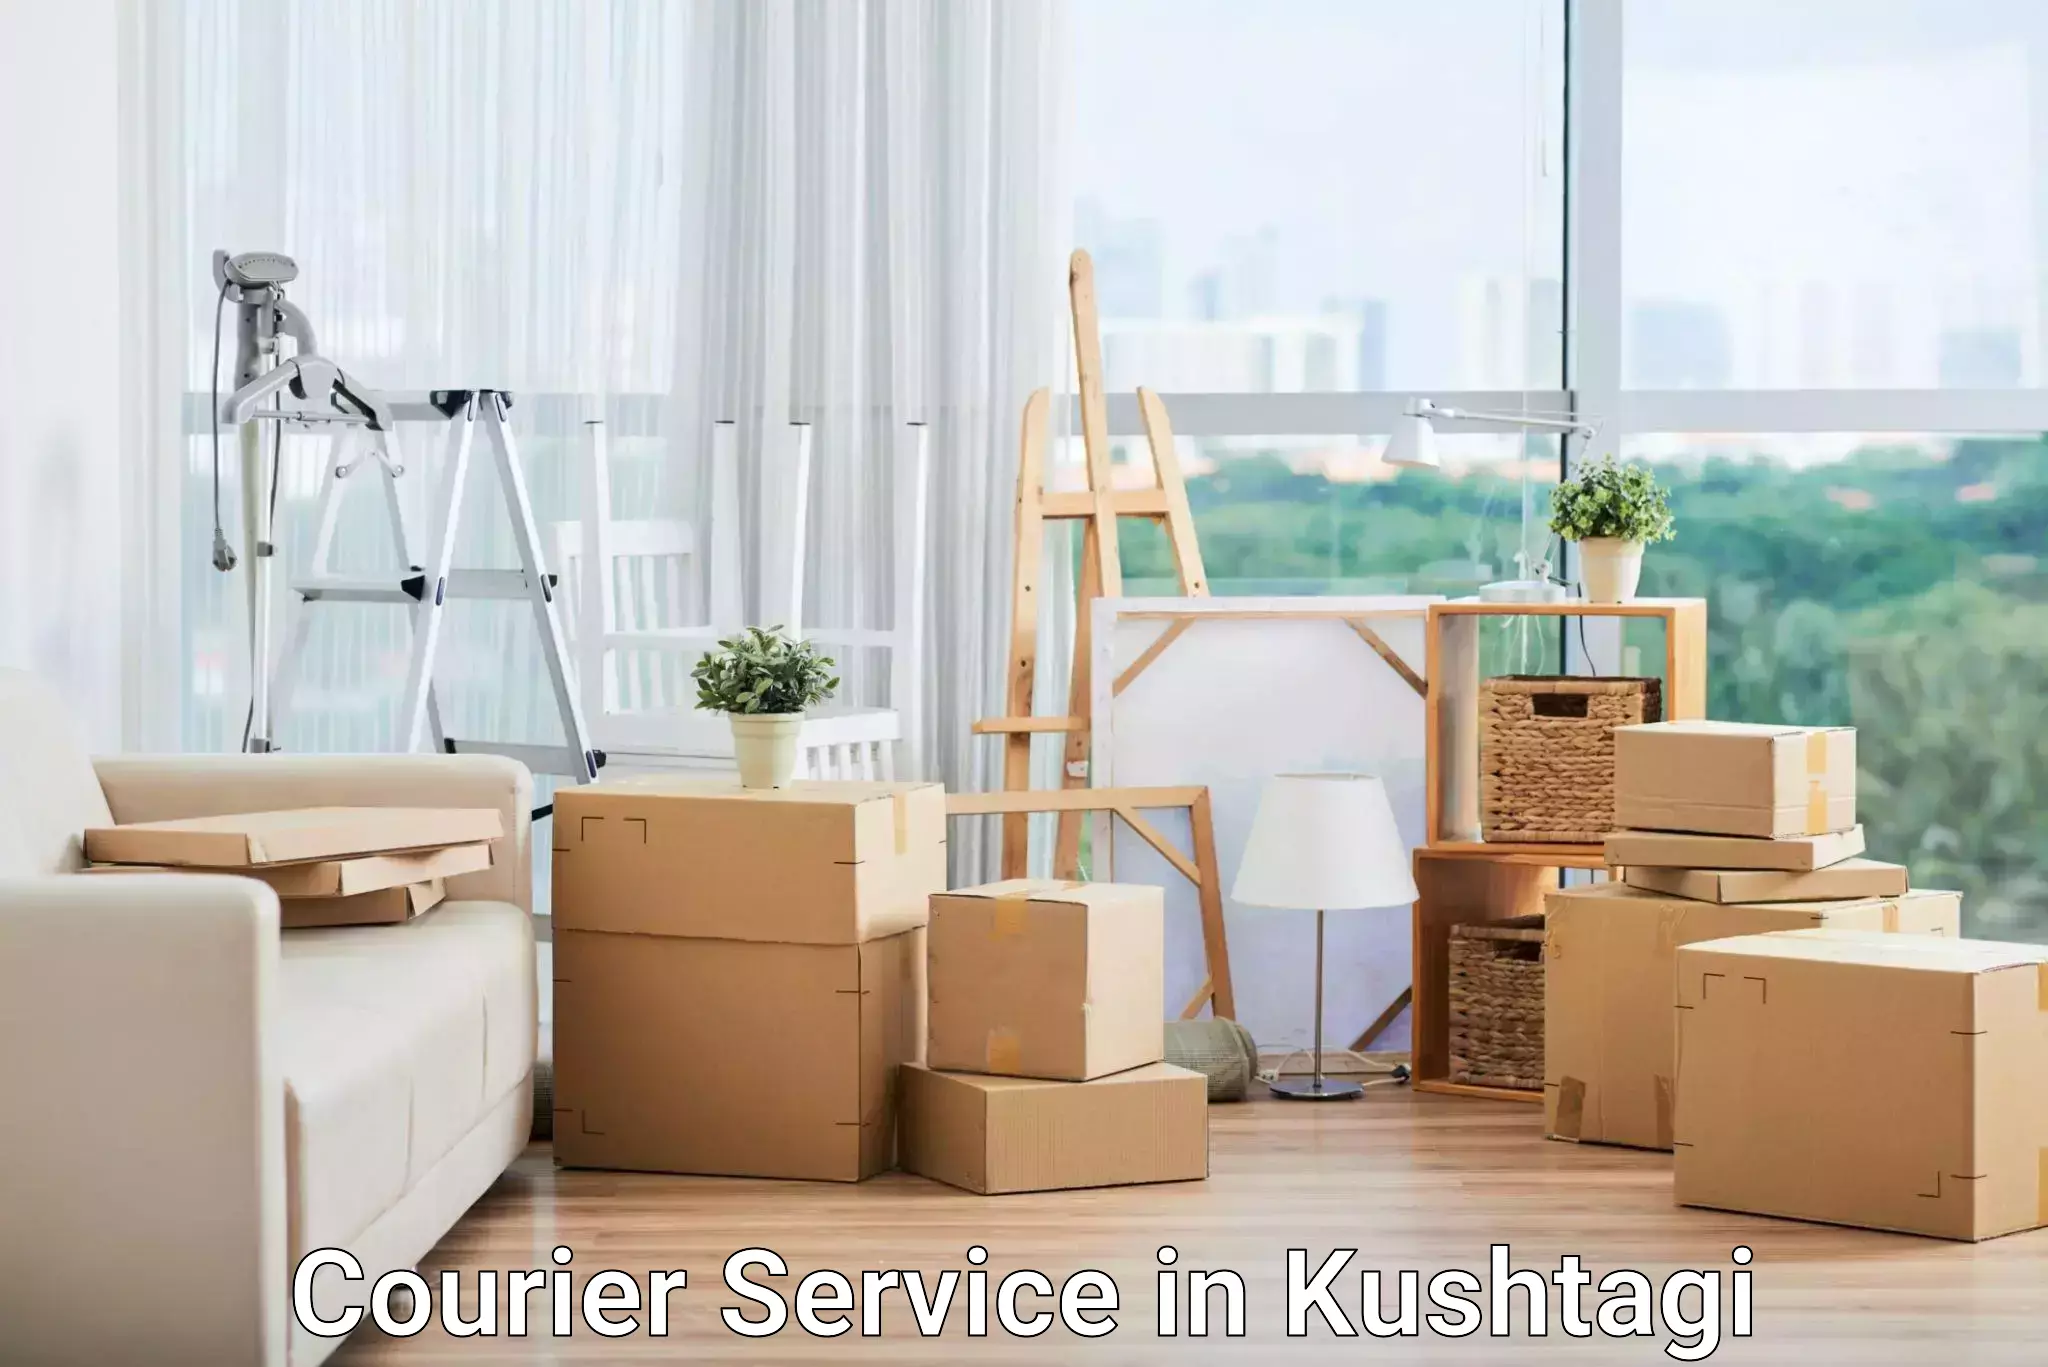 Business delivery service in Kushtagi